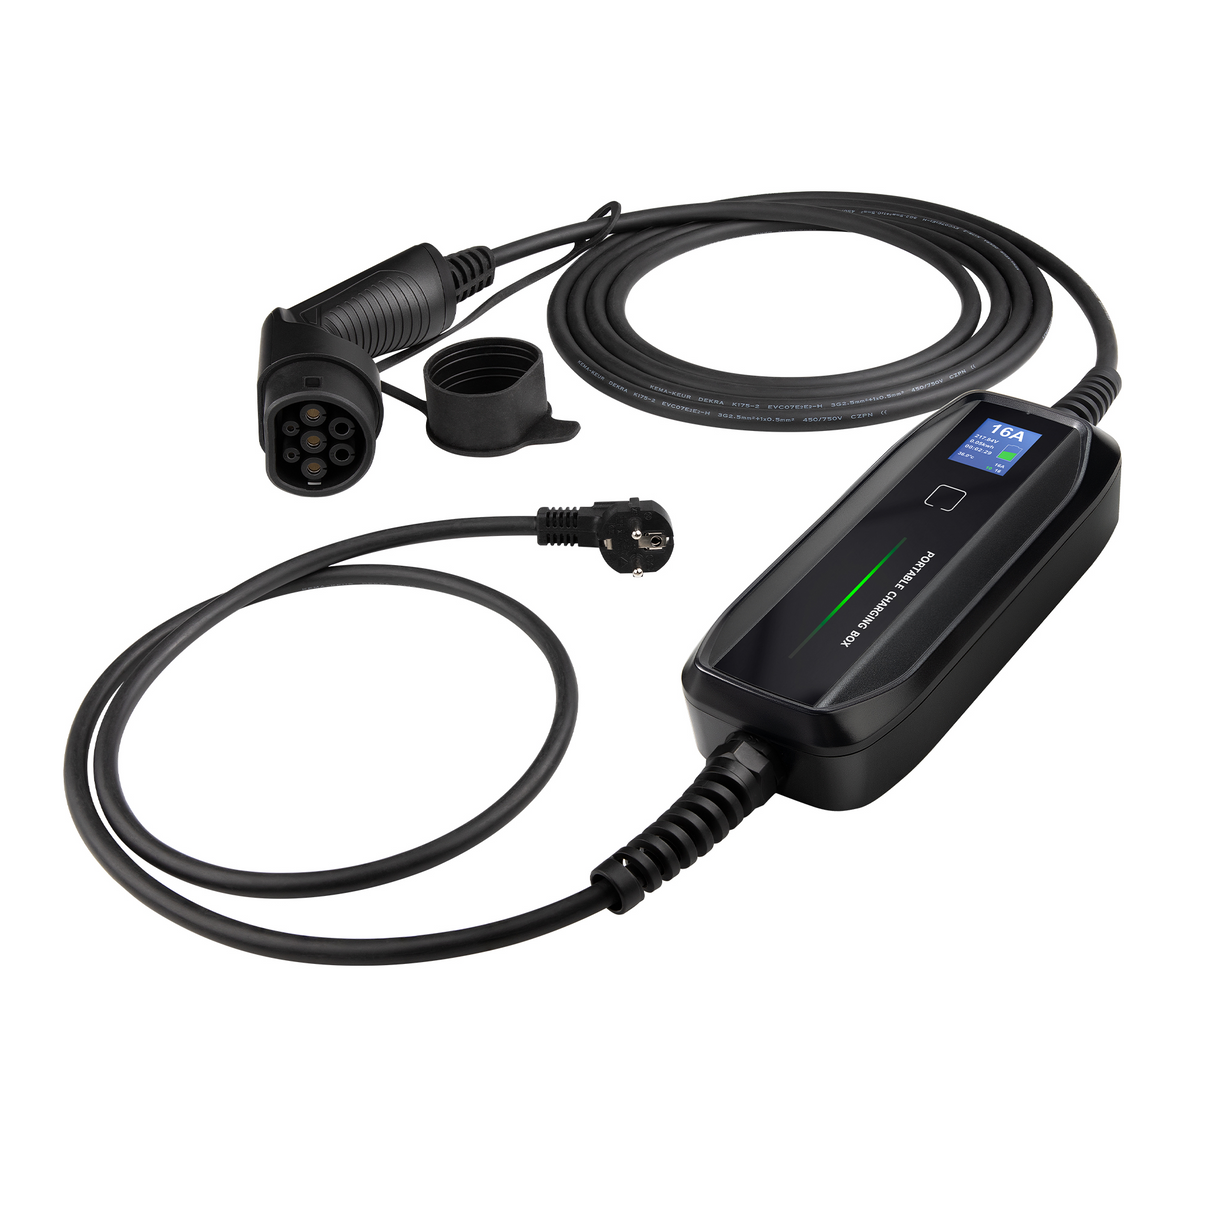 Mobile Charger Skoda Enyaq Coupe - Besen with LCD - Type 2 to Schuko